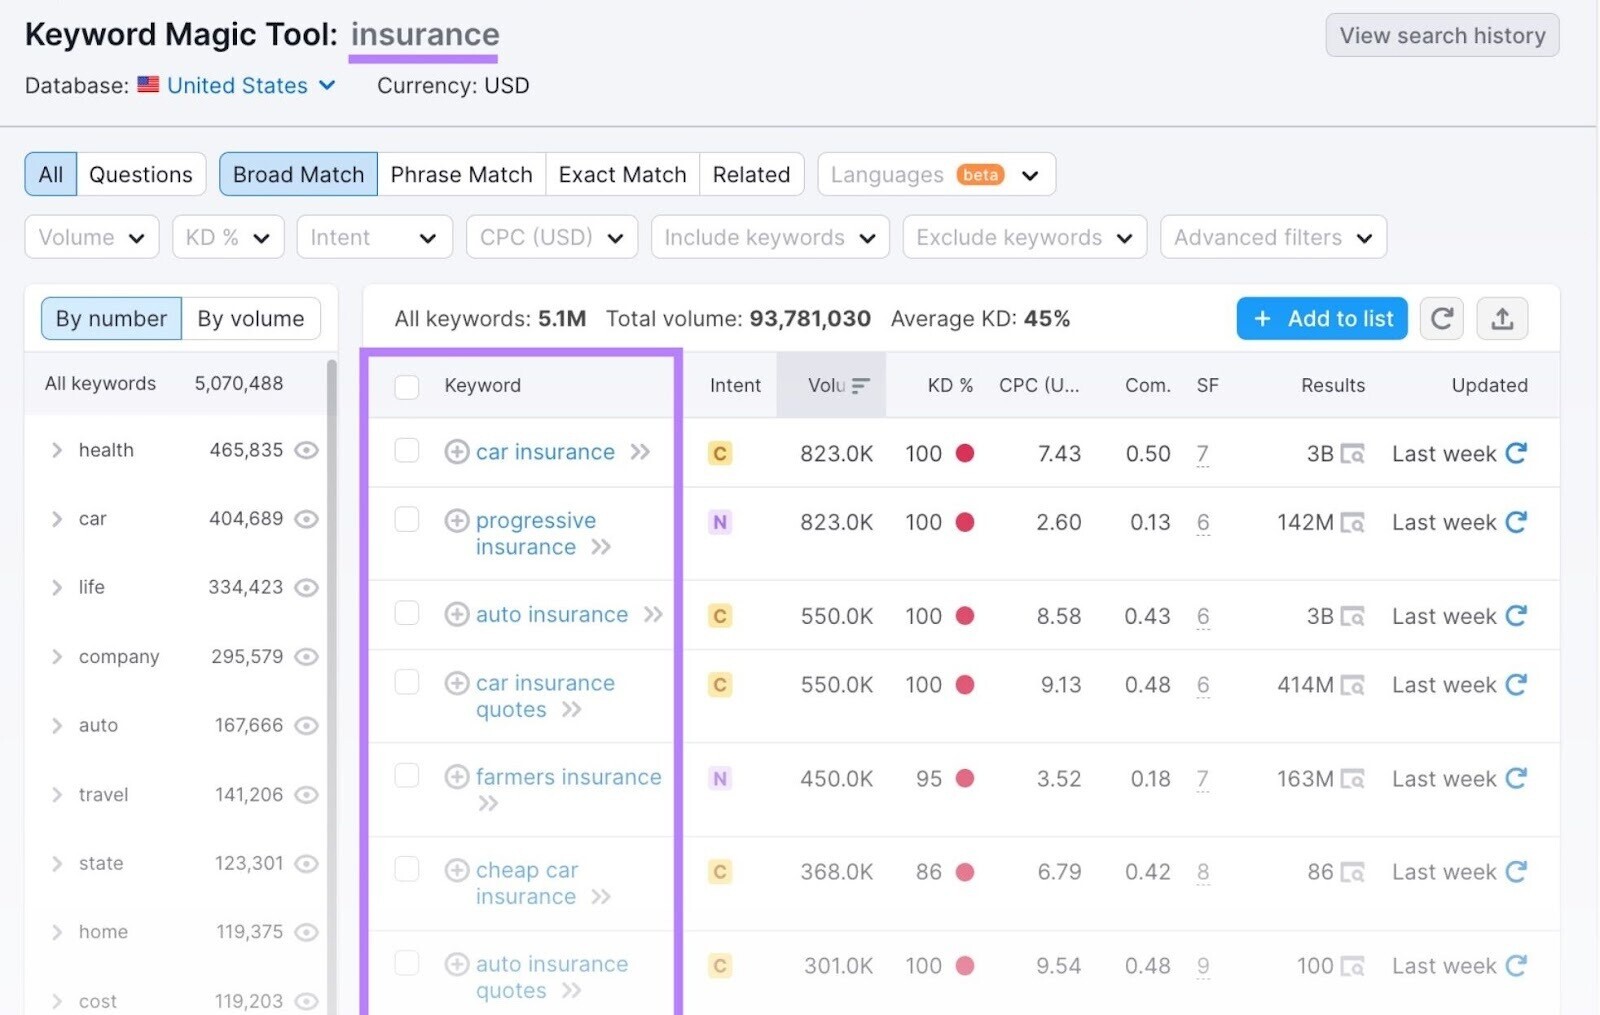 results for "insurance" search in Keyword Magic Tool